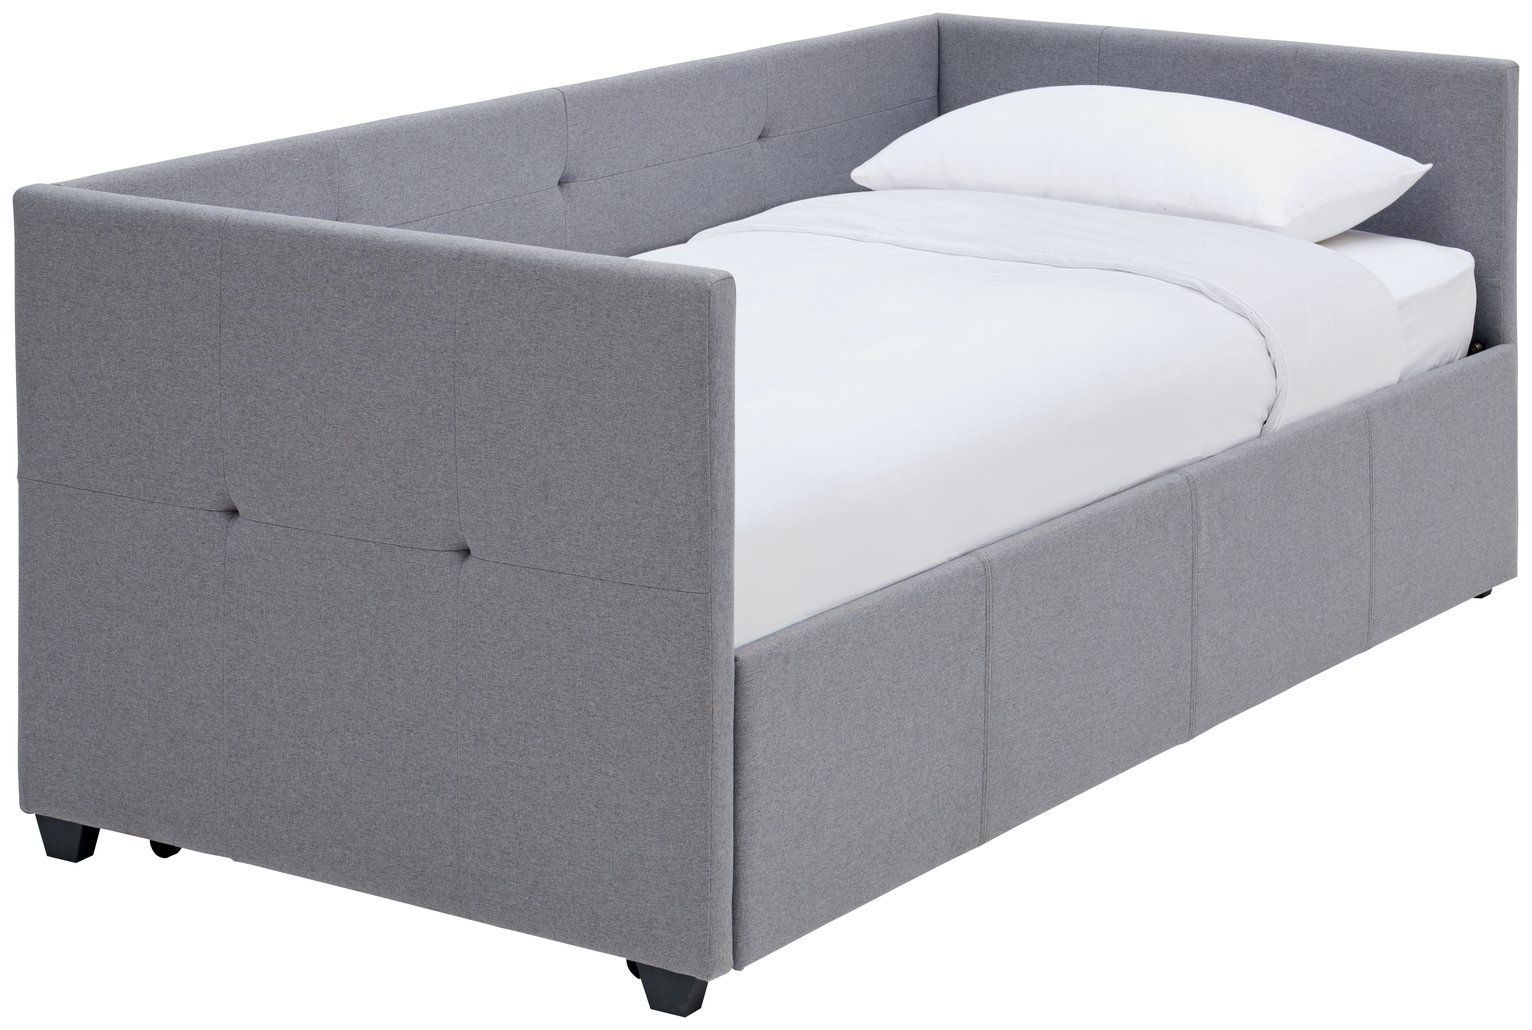 Argos Home Tamara Fabric Day Bed with Trundle - Grey